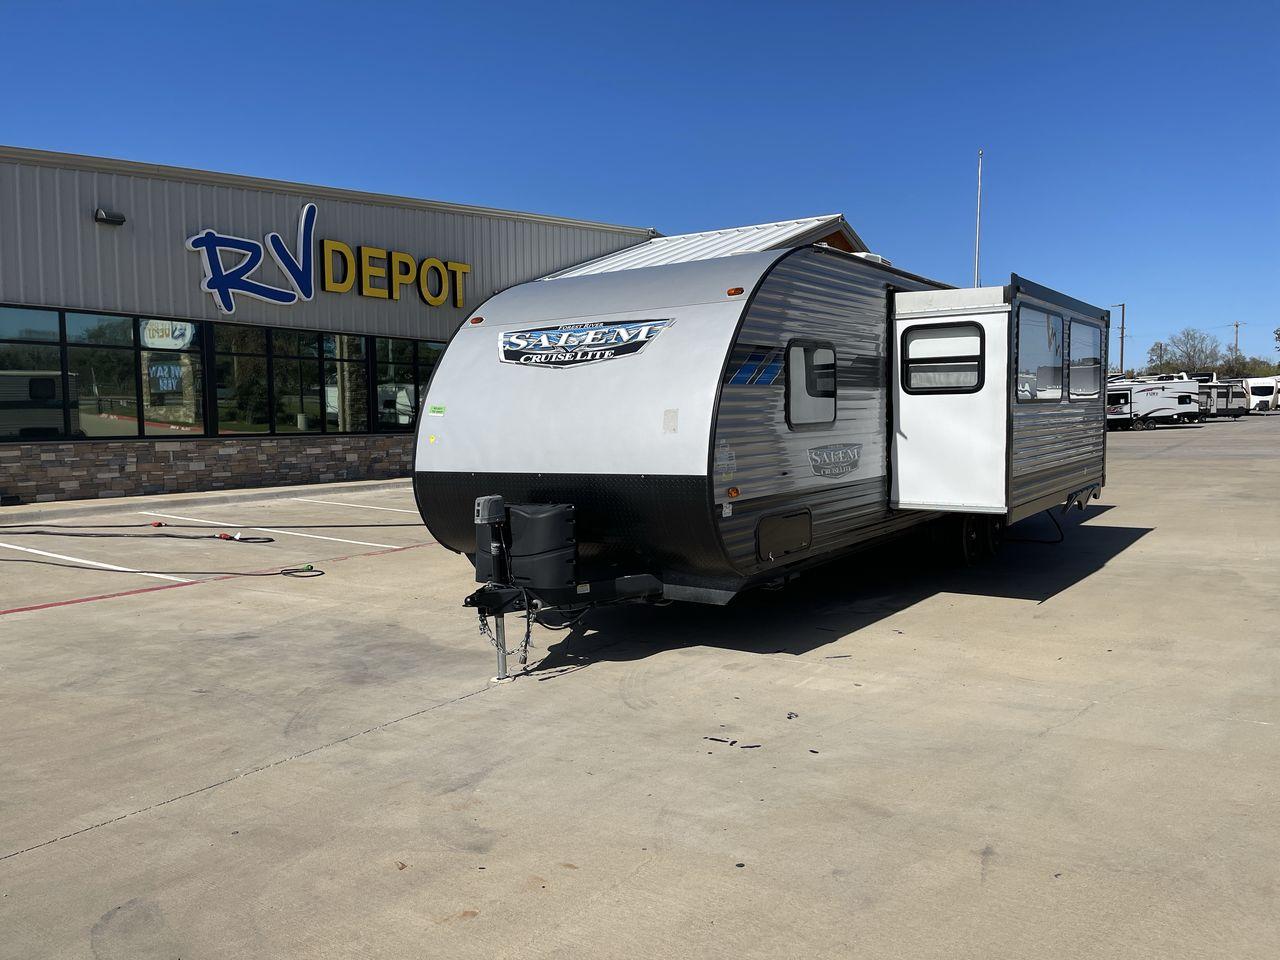 2022 FOREST RIVER SALEM 273QBXL (4X4TSMC27N7) , Length: 33.42 ft. | Dry Weight: 6,028 lbs. | Slides: 1 transmission, located at 4319 N Main St, Cleburne, TX, 76033, (817) 678-5133, 32.385960, -97.391212 - This 2022 Forest River Salem 273QBXL travel trailer offers the whole family versatility and convenience with its features while traveling and on campgrounds. This travel trailer measures 33.42 ft in length, 8 ft in width, 10.33 ft in height, and 6.5 ft in interior height. It has a dry weight of 6,02 - Photo #4